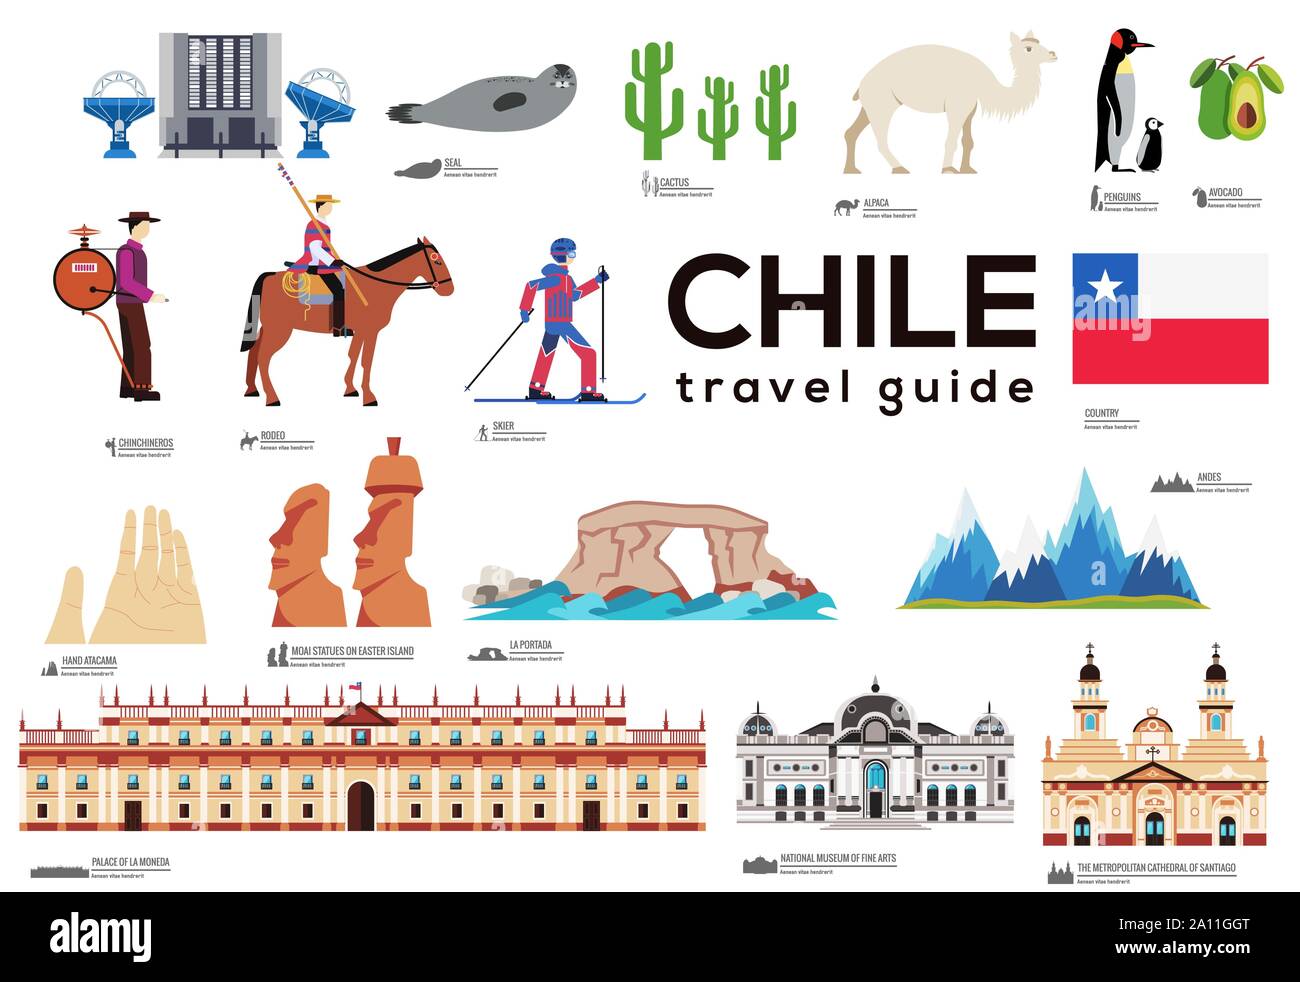 Chile travel guide template. Set of chilean landmarks, cuisine, traditions flat icons, pictograms on white. Sightseeing attractions and cultural symbol vector elements for tourist infographic, web. Stock Vector